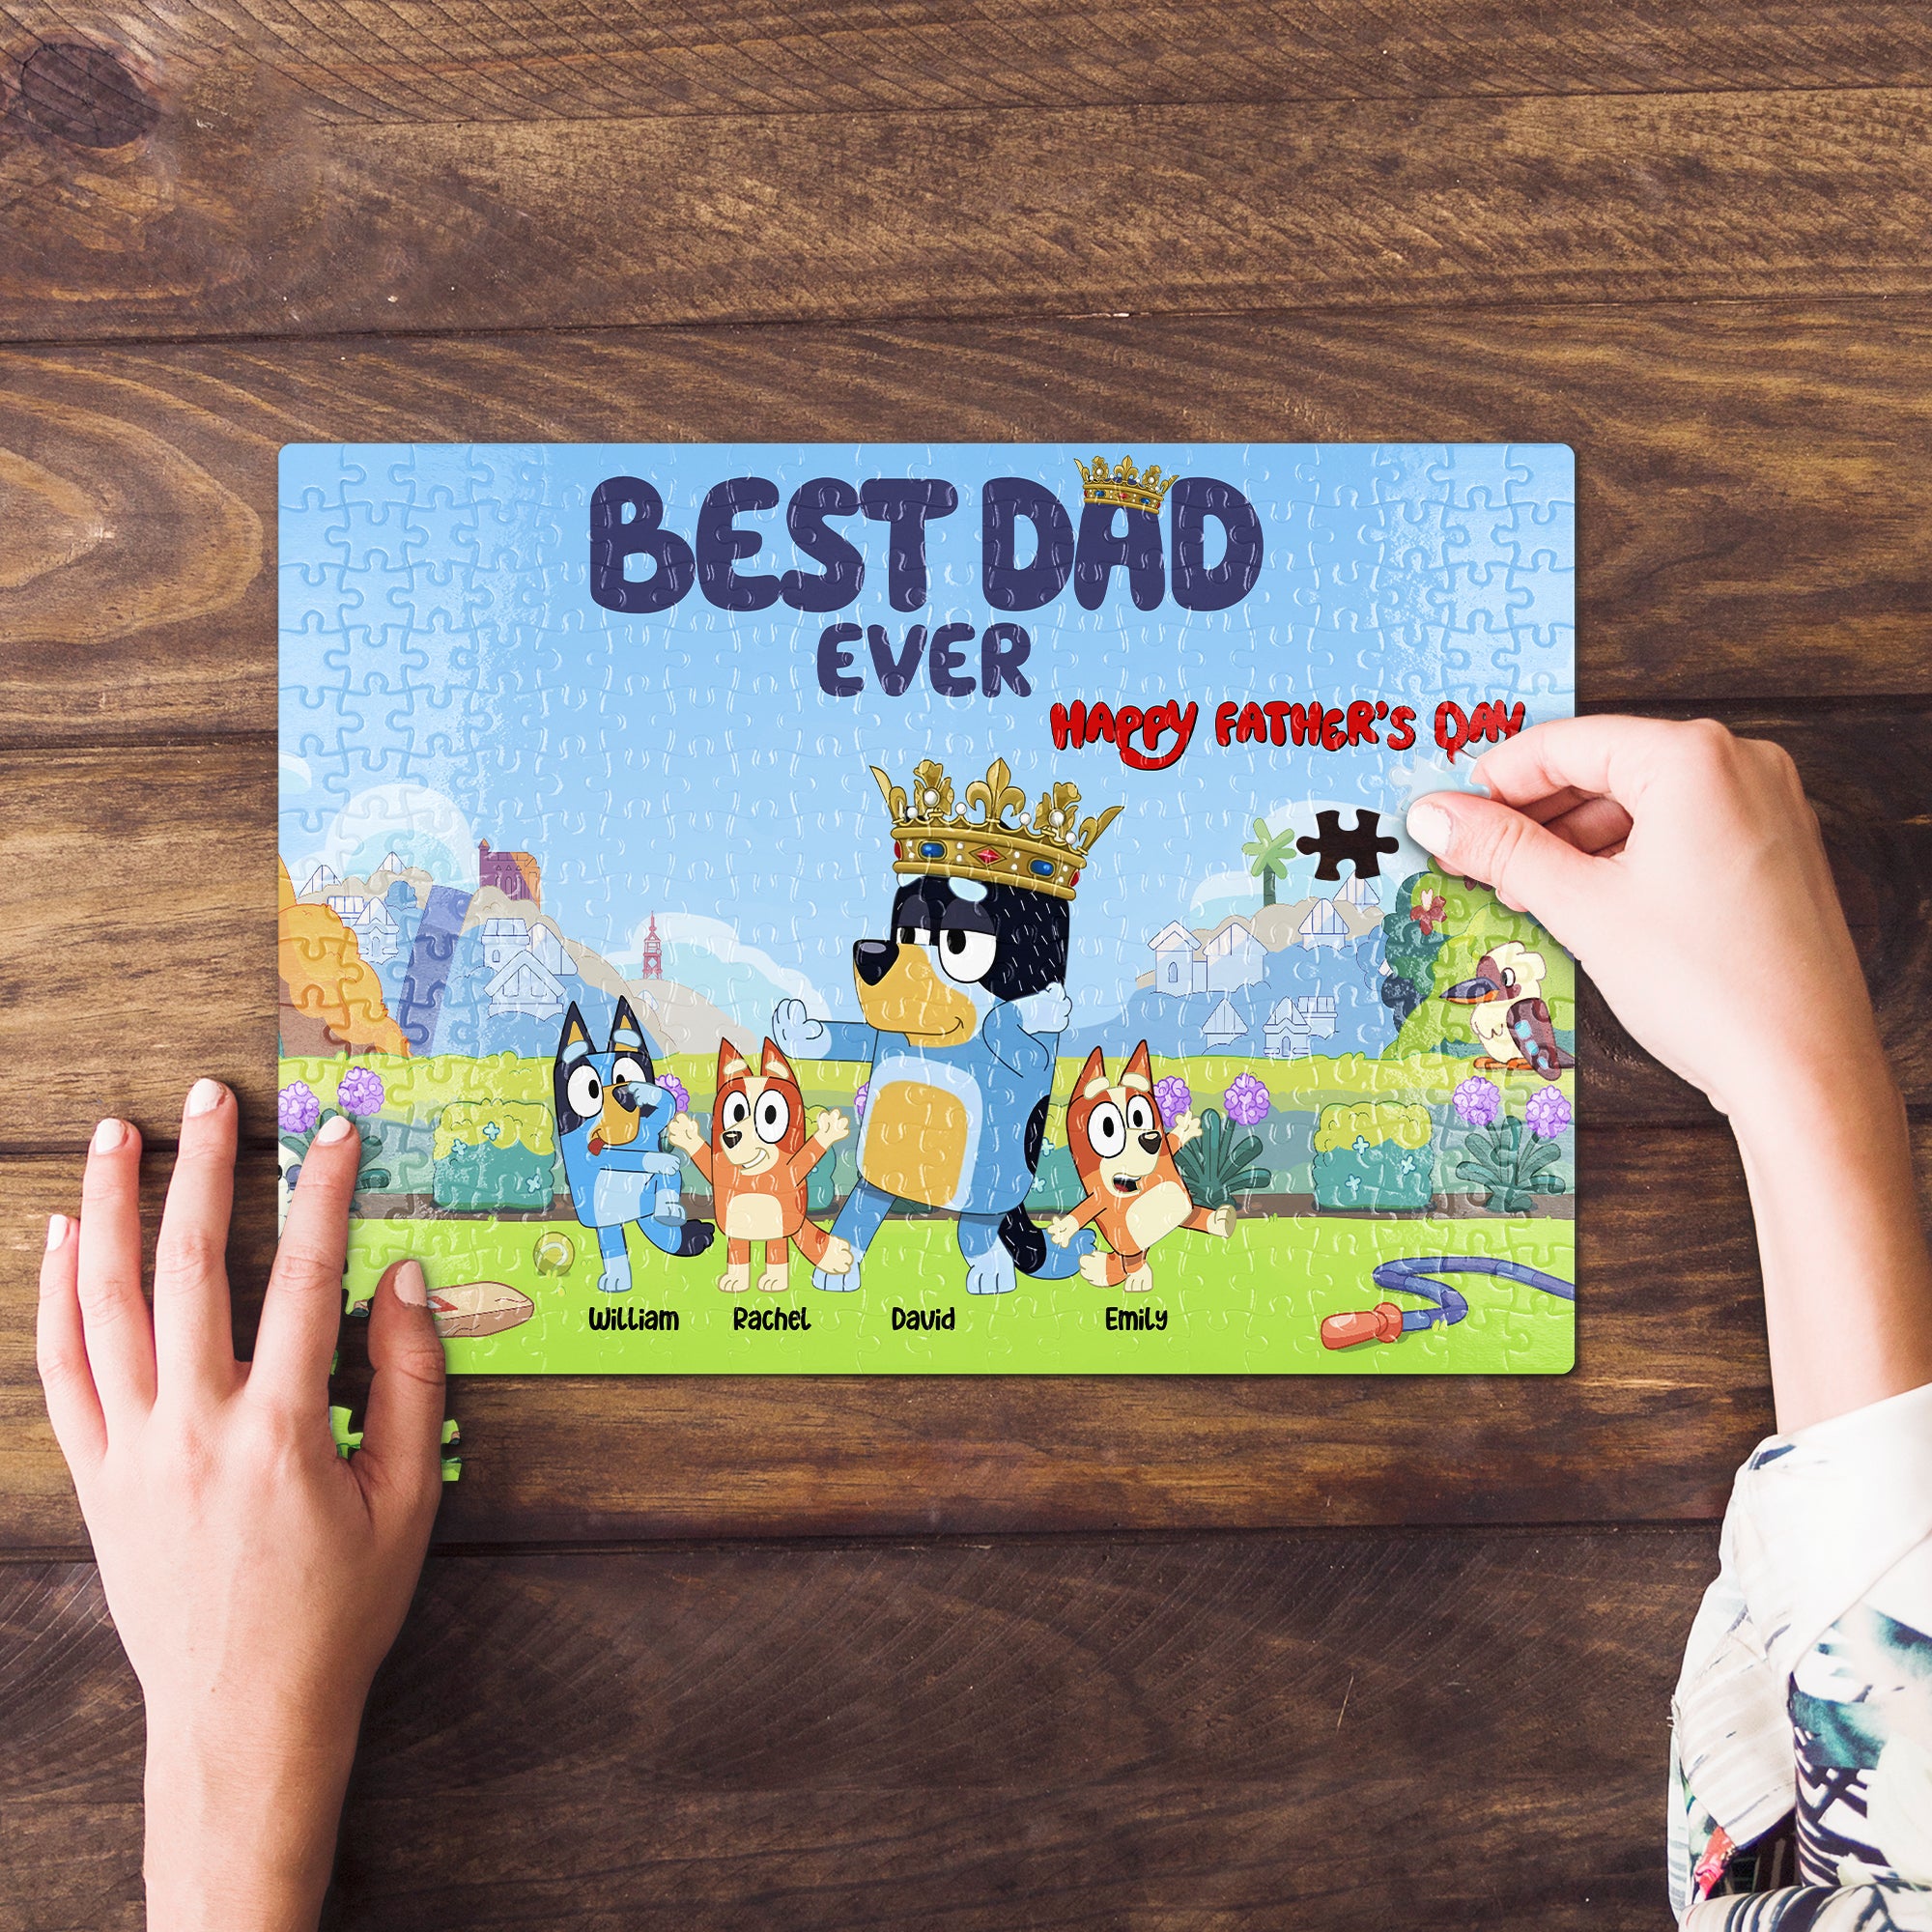 Personalized Gifts For Dad Jigsaw Puzzle 04natn250424 Father's Day-Homacus